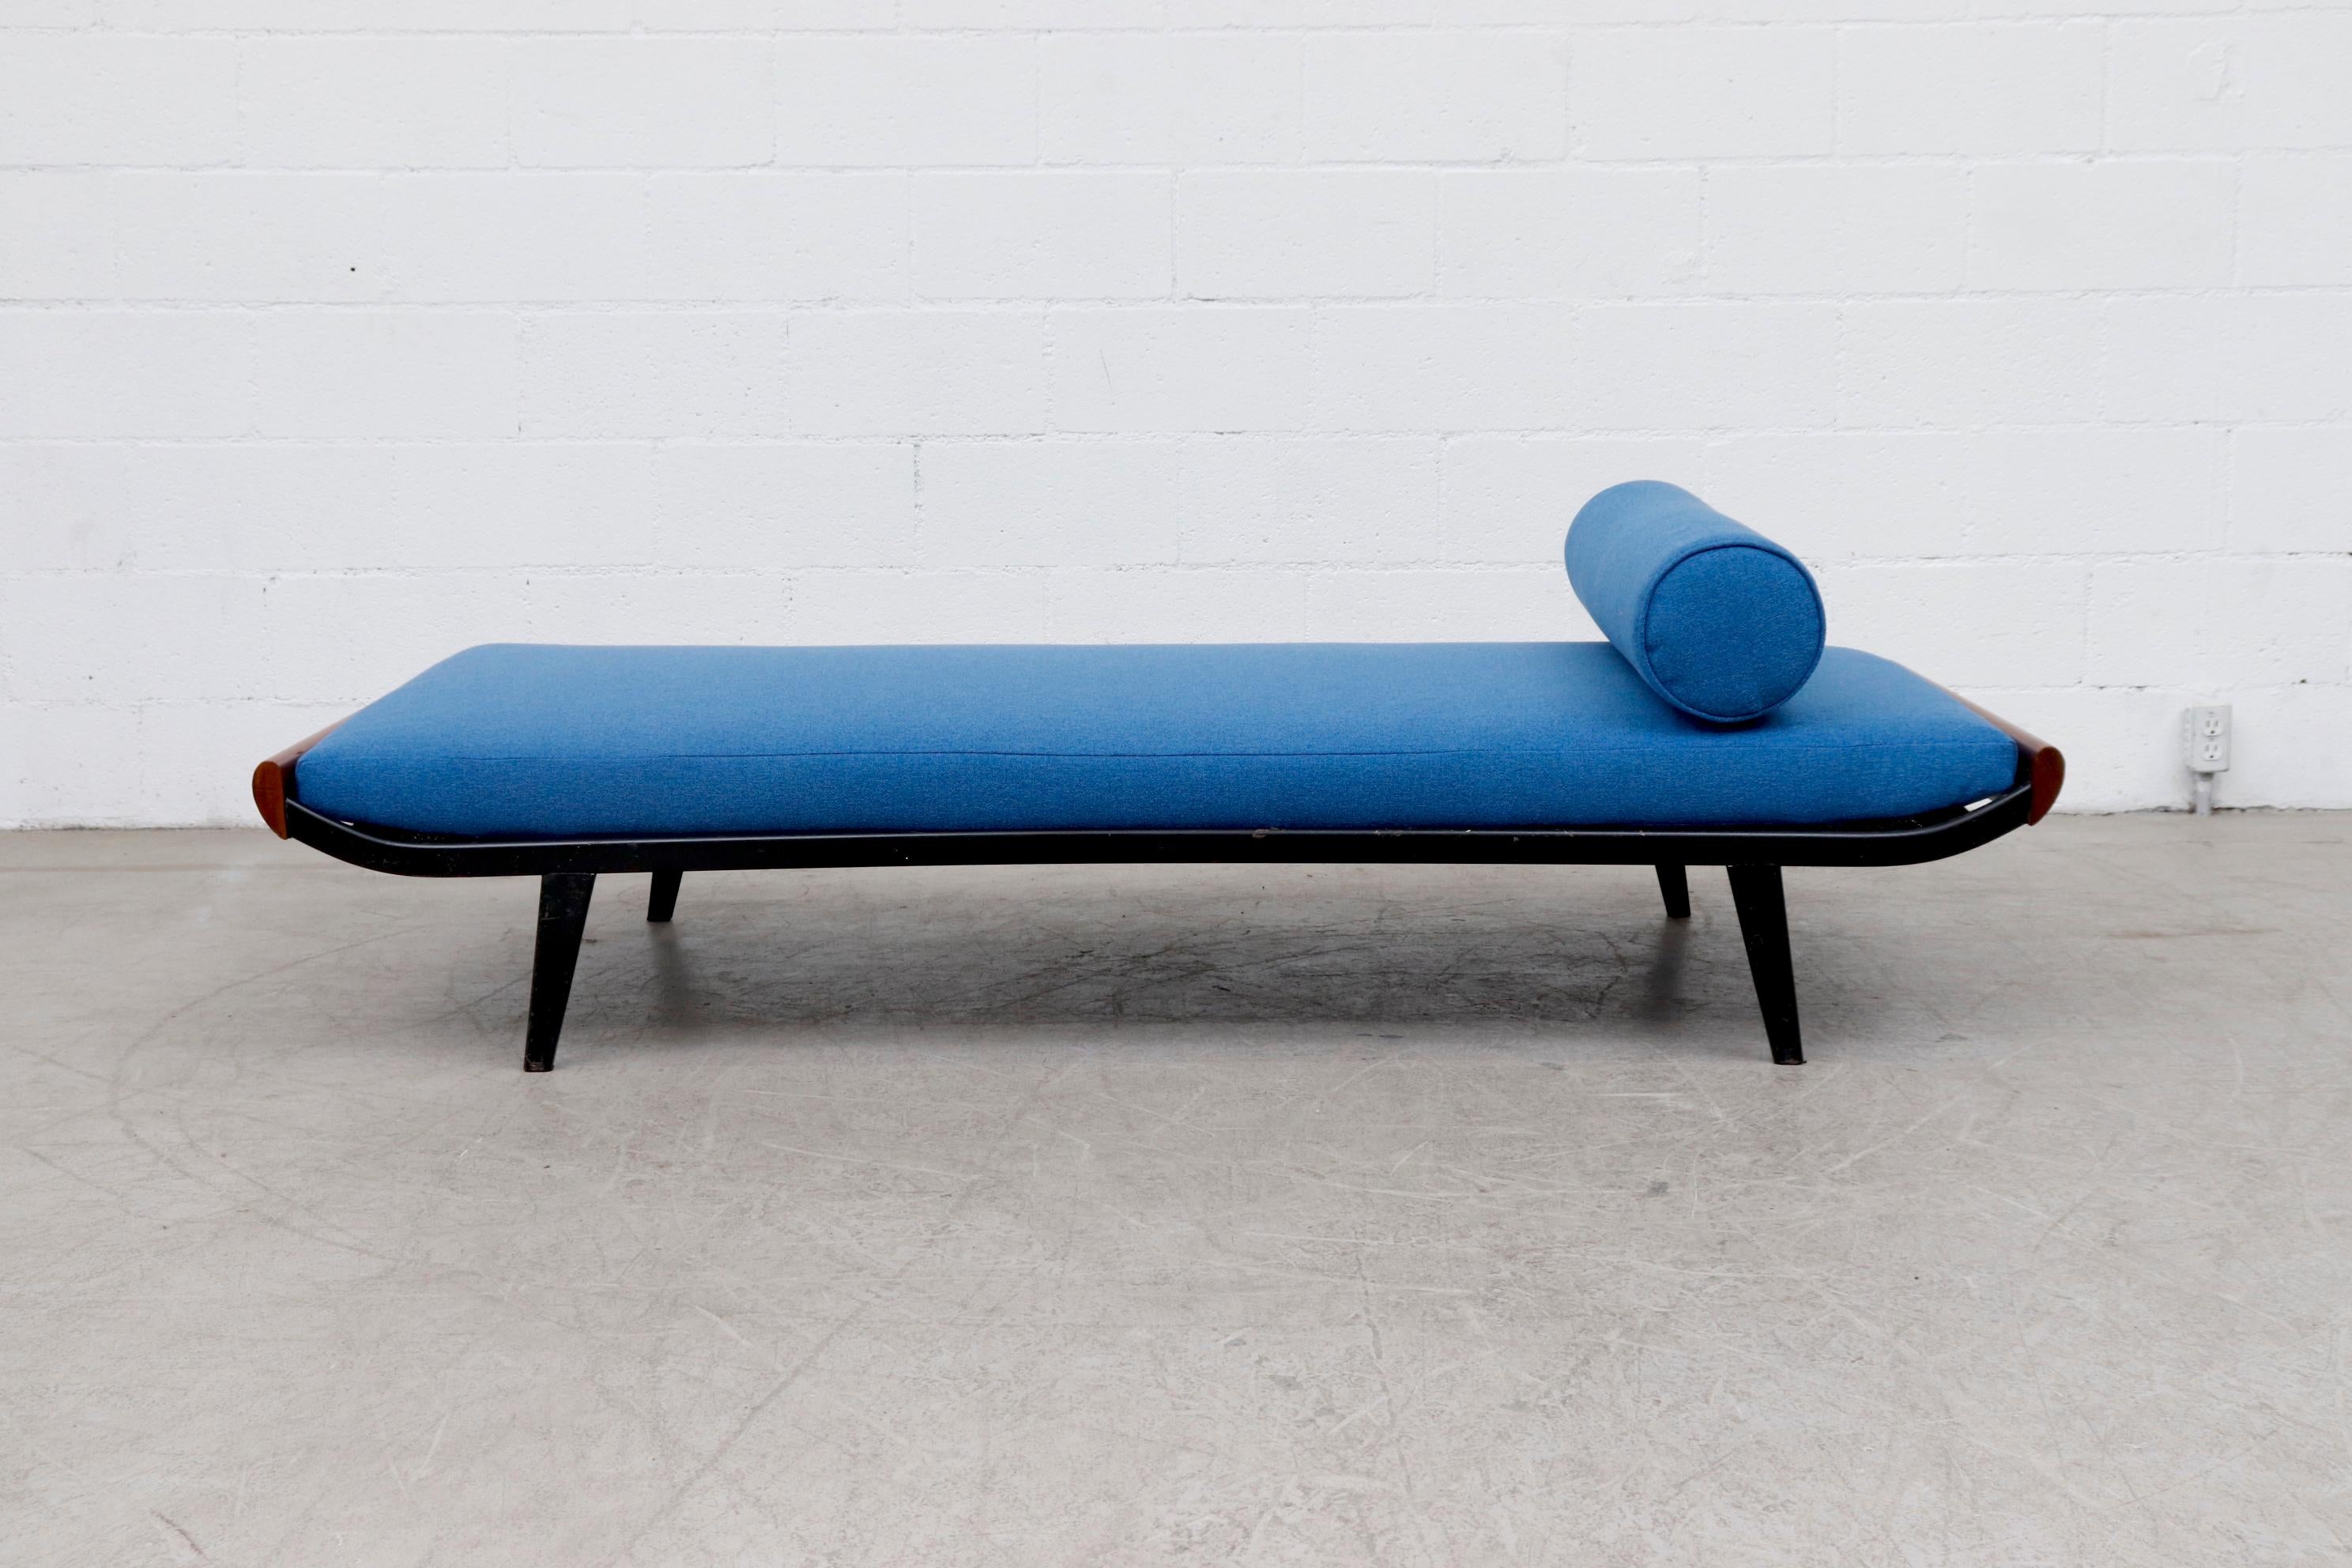 Beautiful 1960s Cleopatra daybed by A.R. Cordemeyer. Lightly refinished teak wood ends with dark grey metal enameled frame and 'Auping' tag on mesh springs with new cobalt blue mattress and matching bolster. Frame in original condition with visible